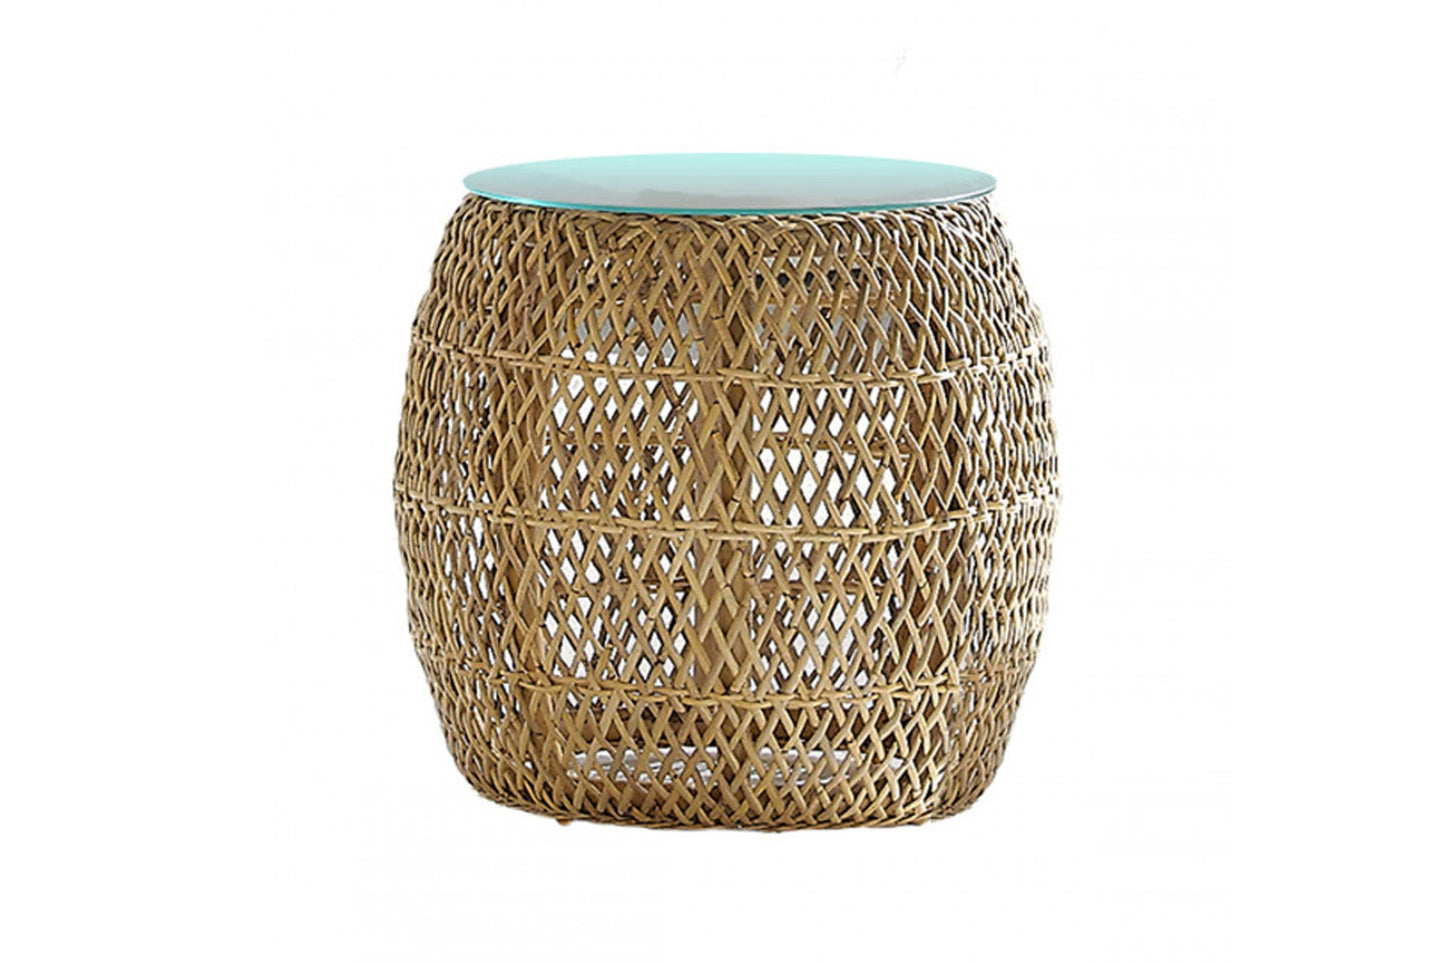 Sumatra end table with honey color.  End table for the outdoor livingroom.